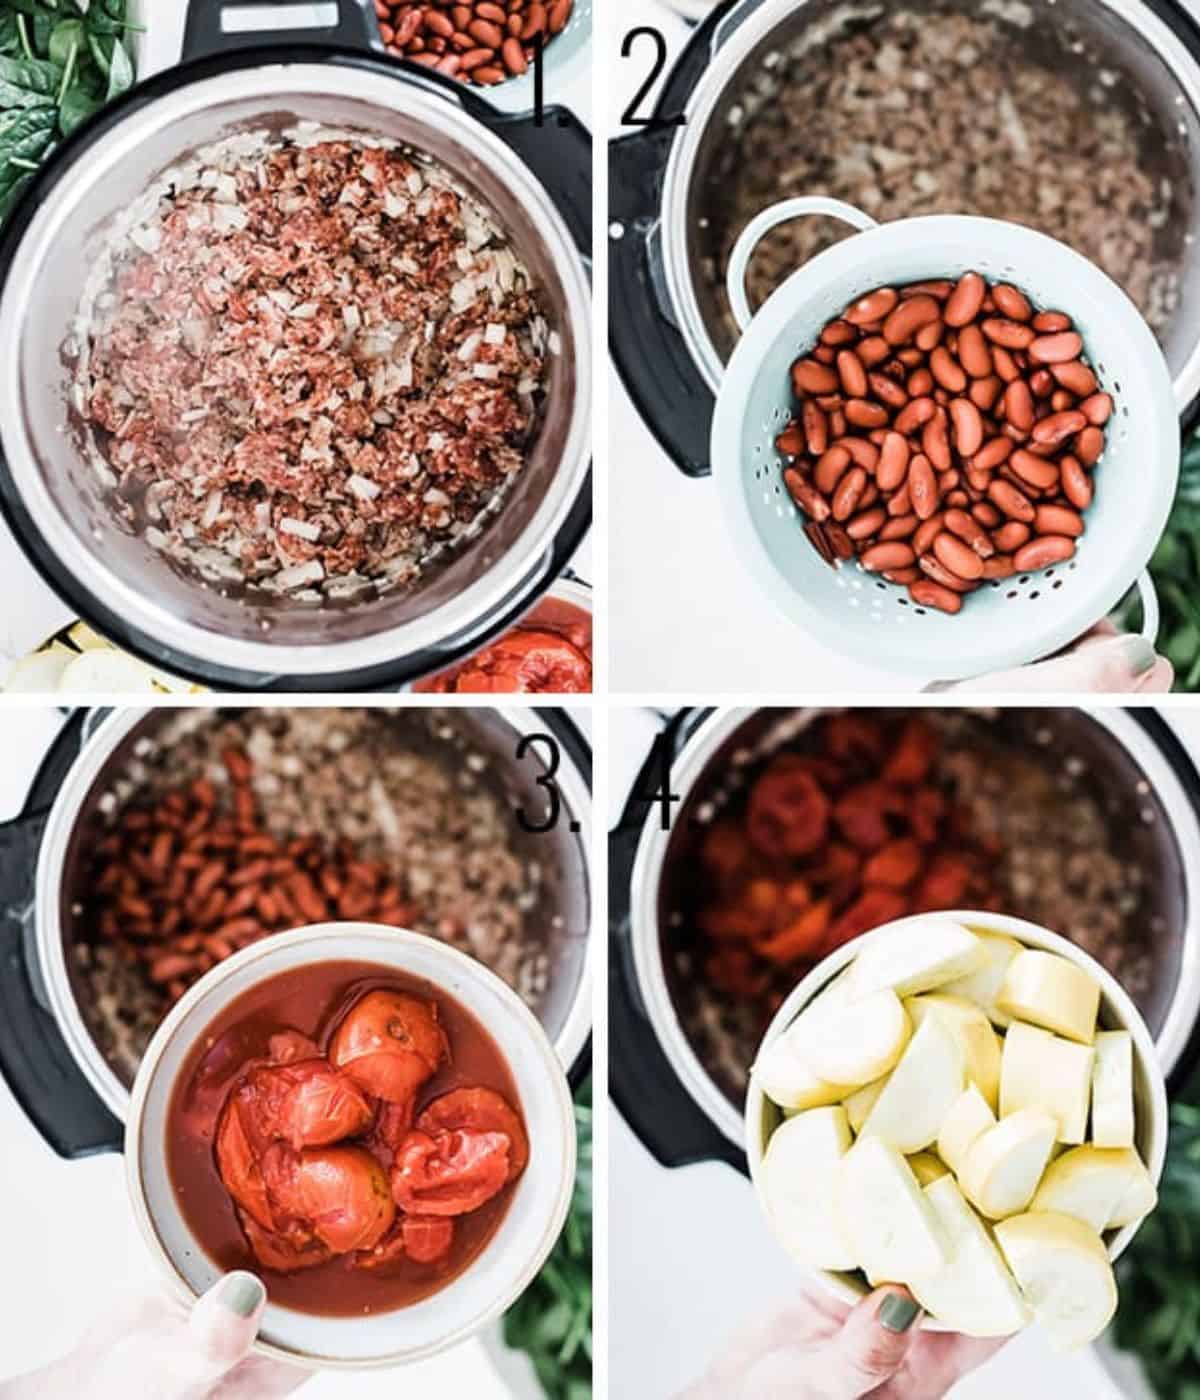 A collage showing the steps to make tortellini soup including browning the sausage, adding beans, tomatoes, and veggies to the pot.